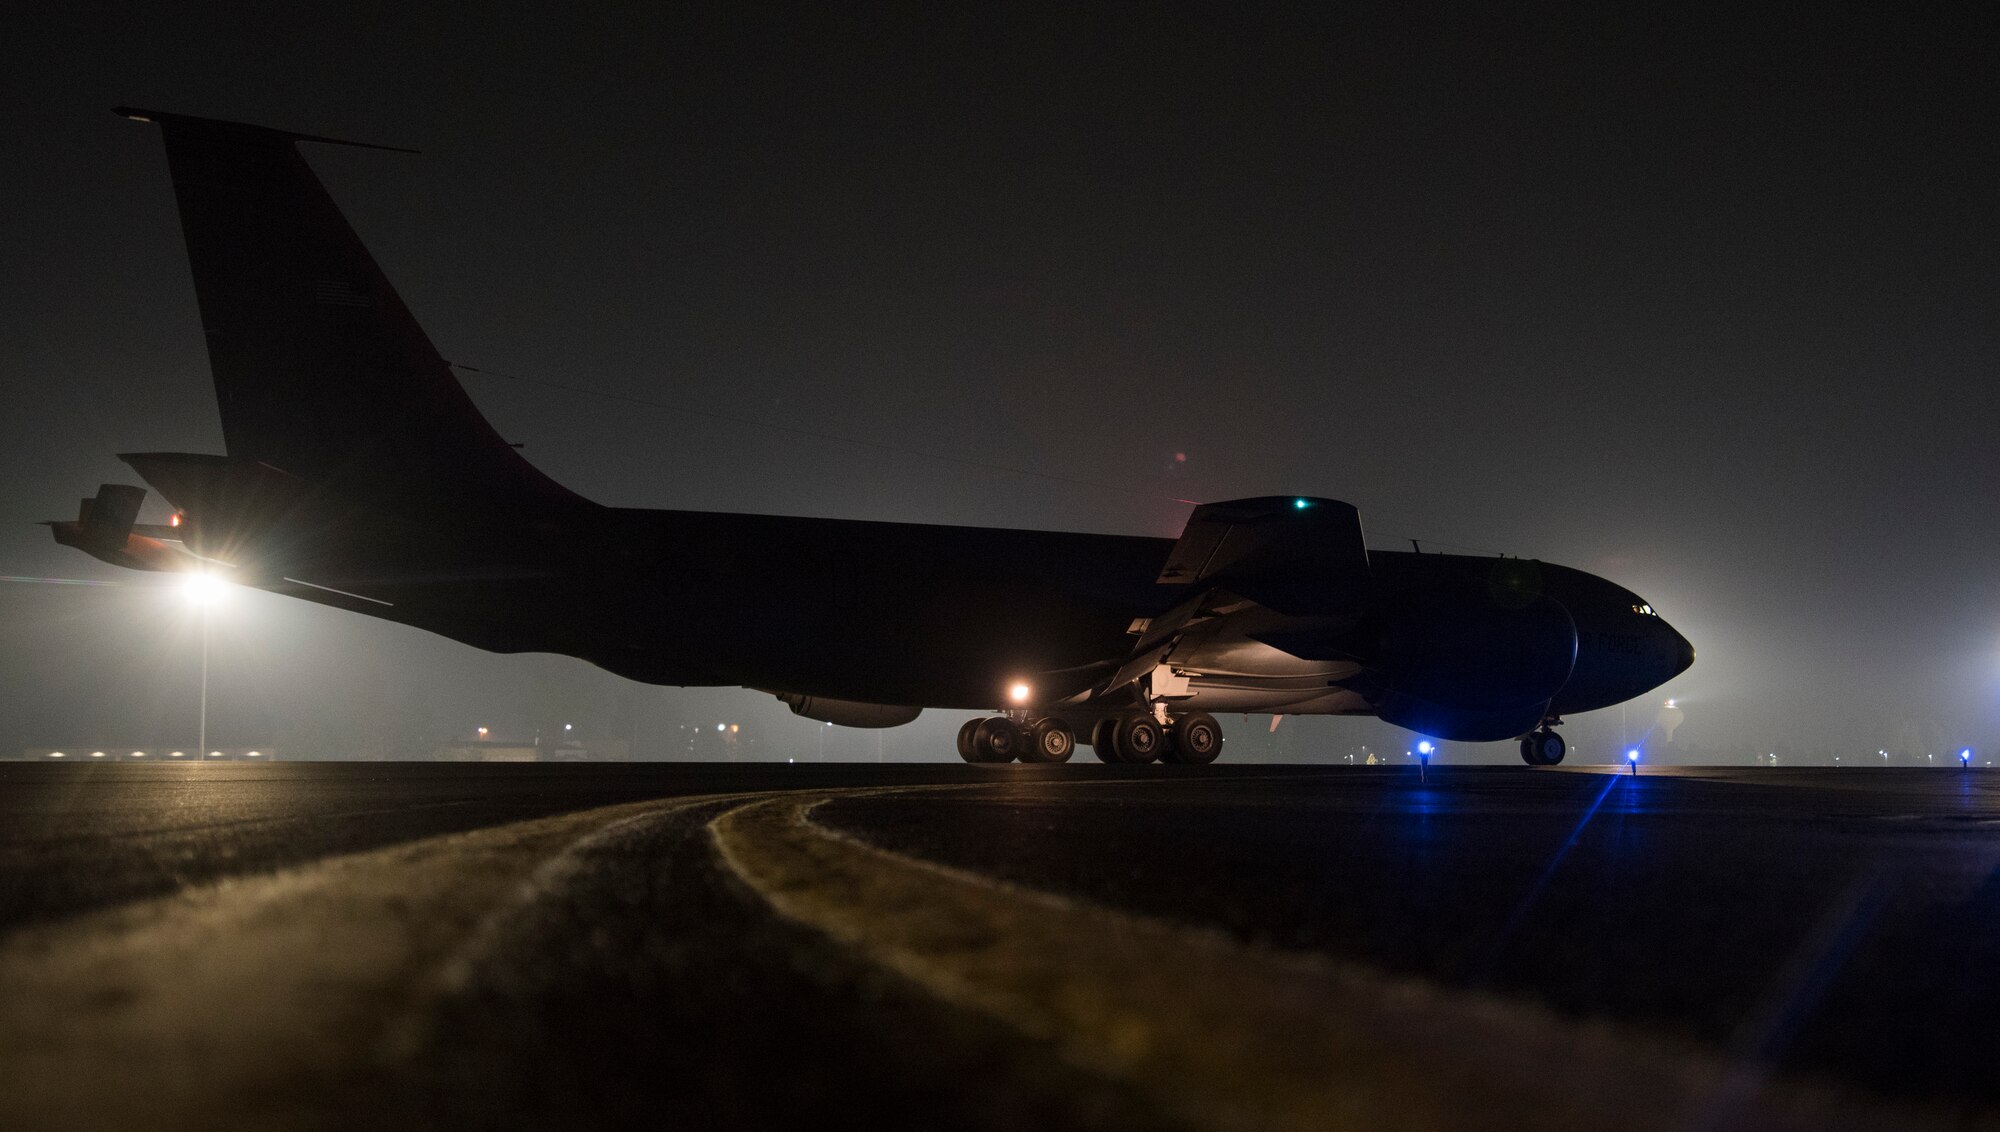 A U.S. Air Force KC-135 Stratotanker, assigned to the 92d Air Refueling Wing, parks on the runway during an exercise at Fairchild Air Force Base, Washington, Aug. 21, 2018. Fairchild’s KC-135 Stratotankers have been utilized for decades to extend the reach of fighters, bombers and other aircraft through aerial refueling. Because of this “air bridge,” U.S. and allied air power can be projected around the world 24/7, 365 days a year. (U.S. Air Force photo by Airman 1st Class Lawrence Sena)